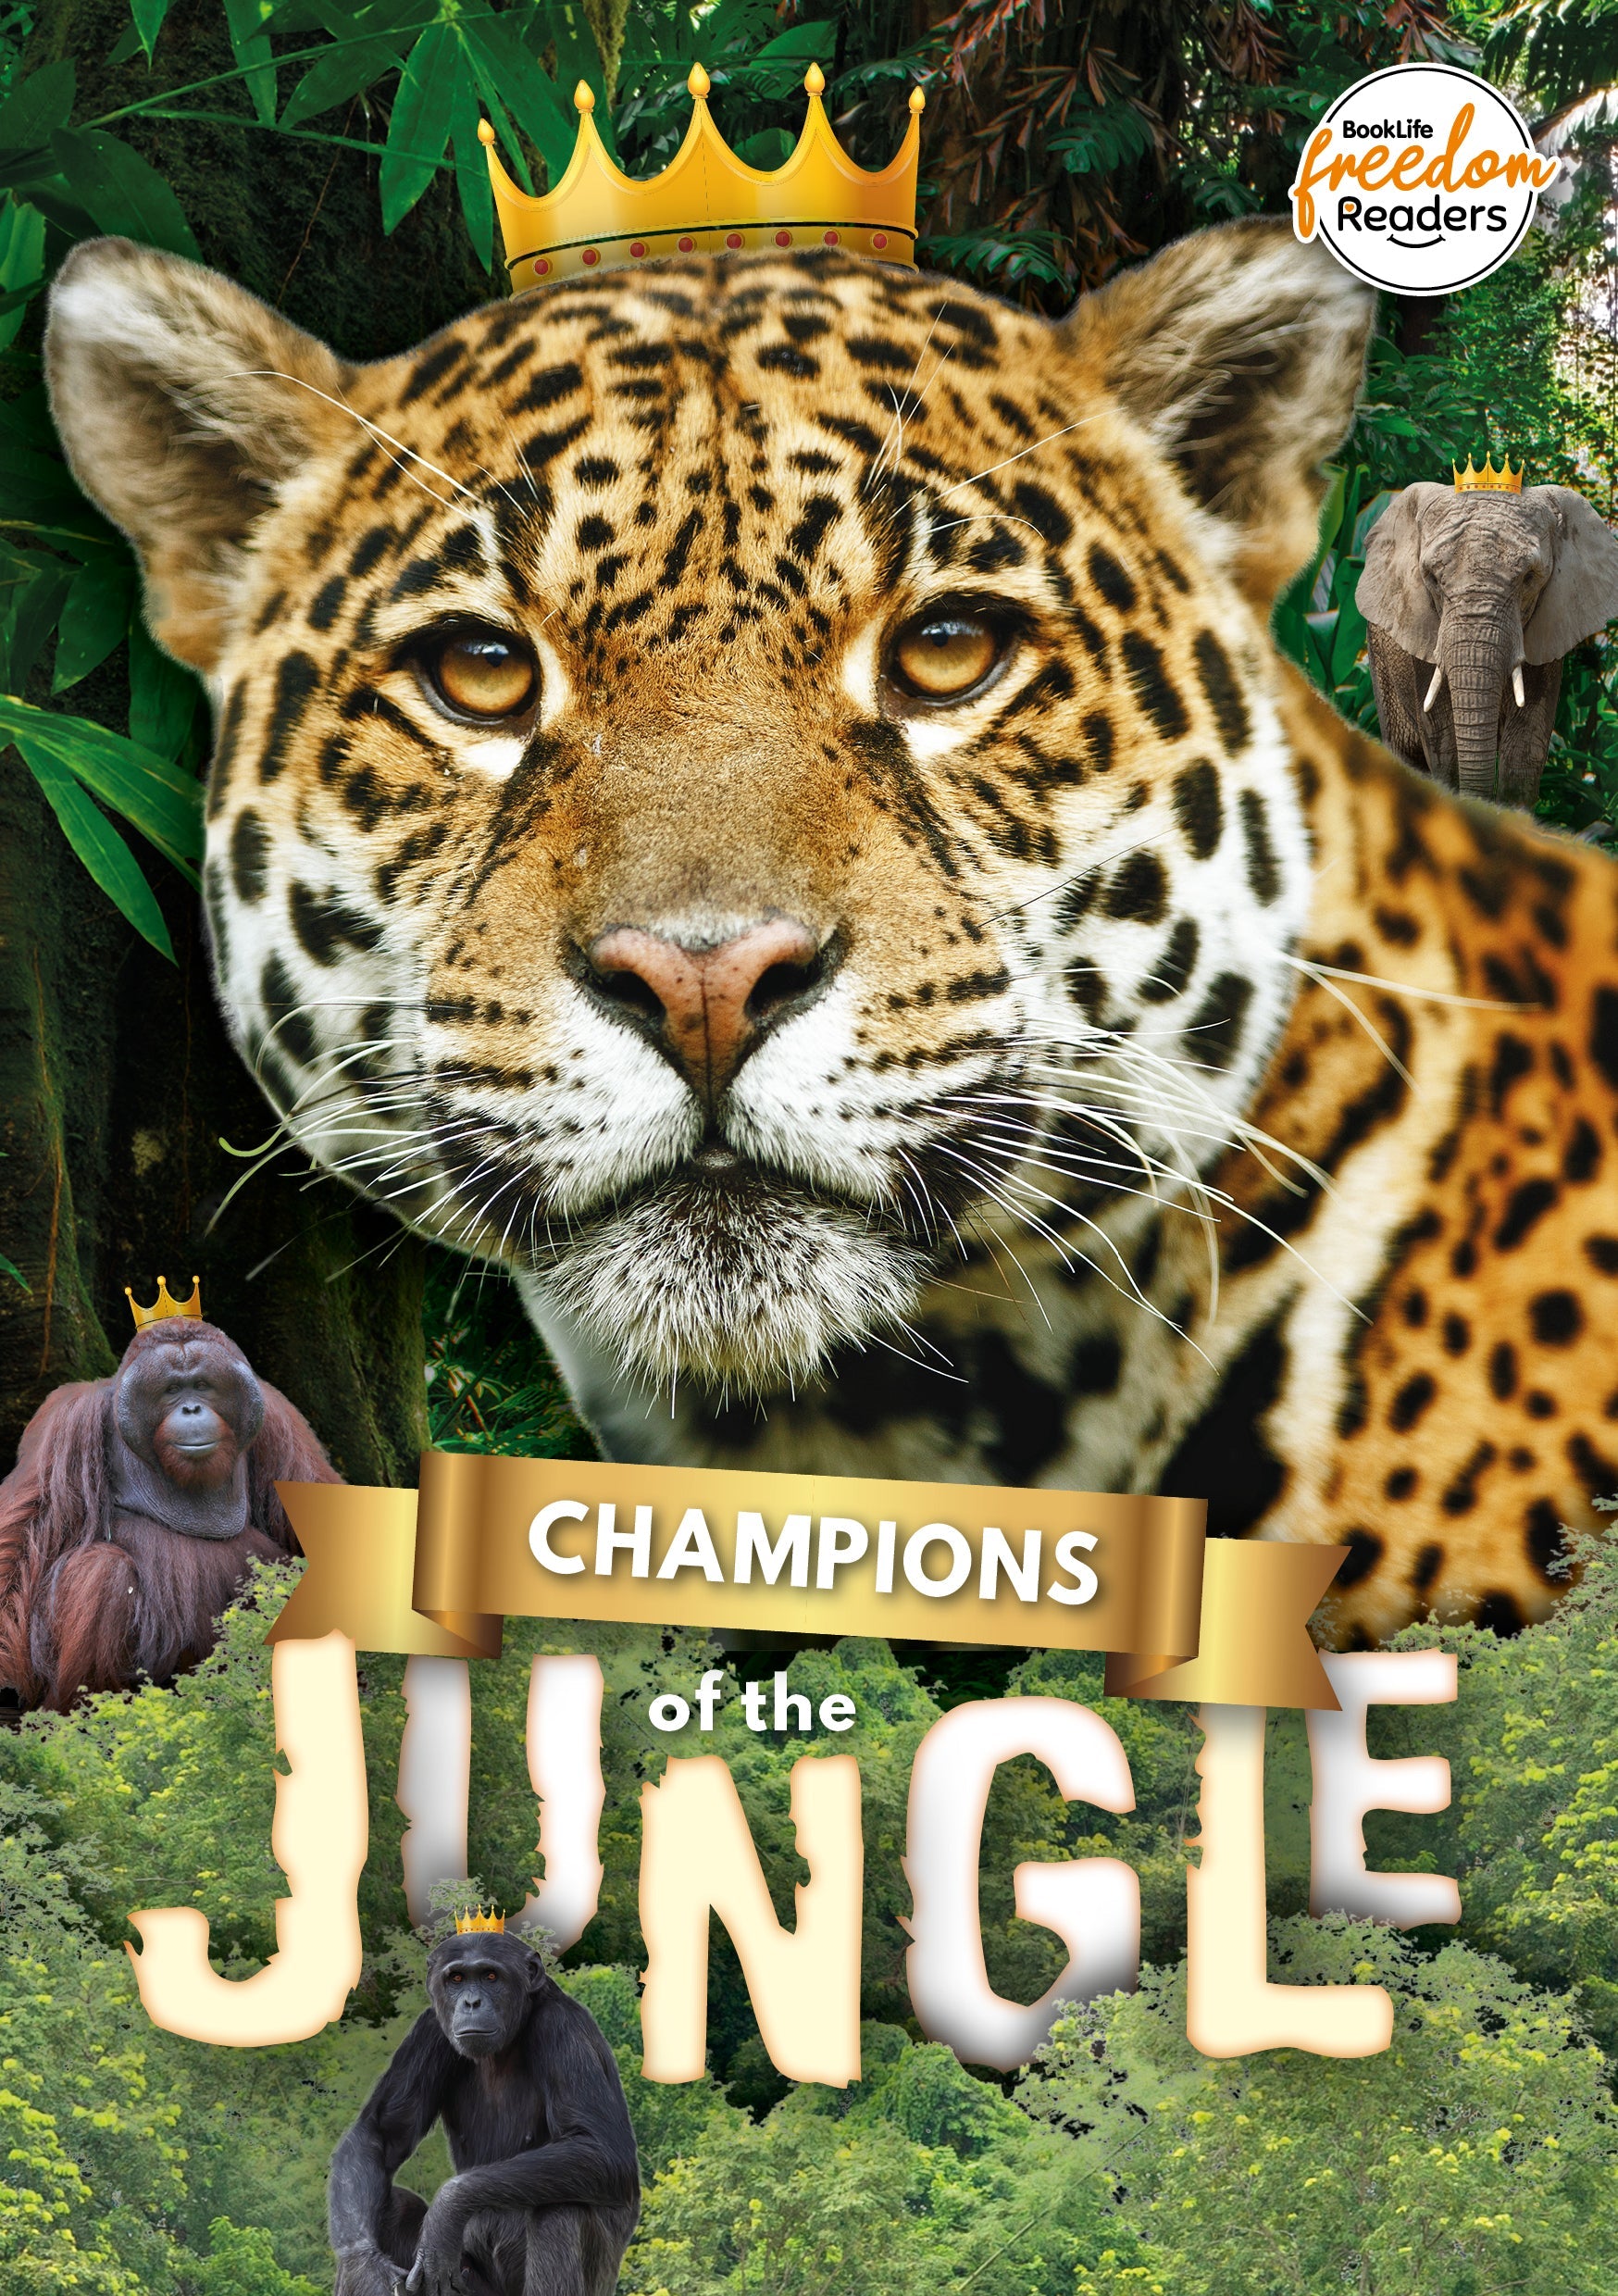 Champions of the Jungle